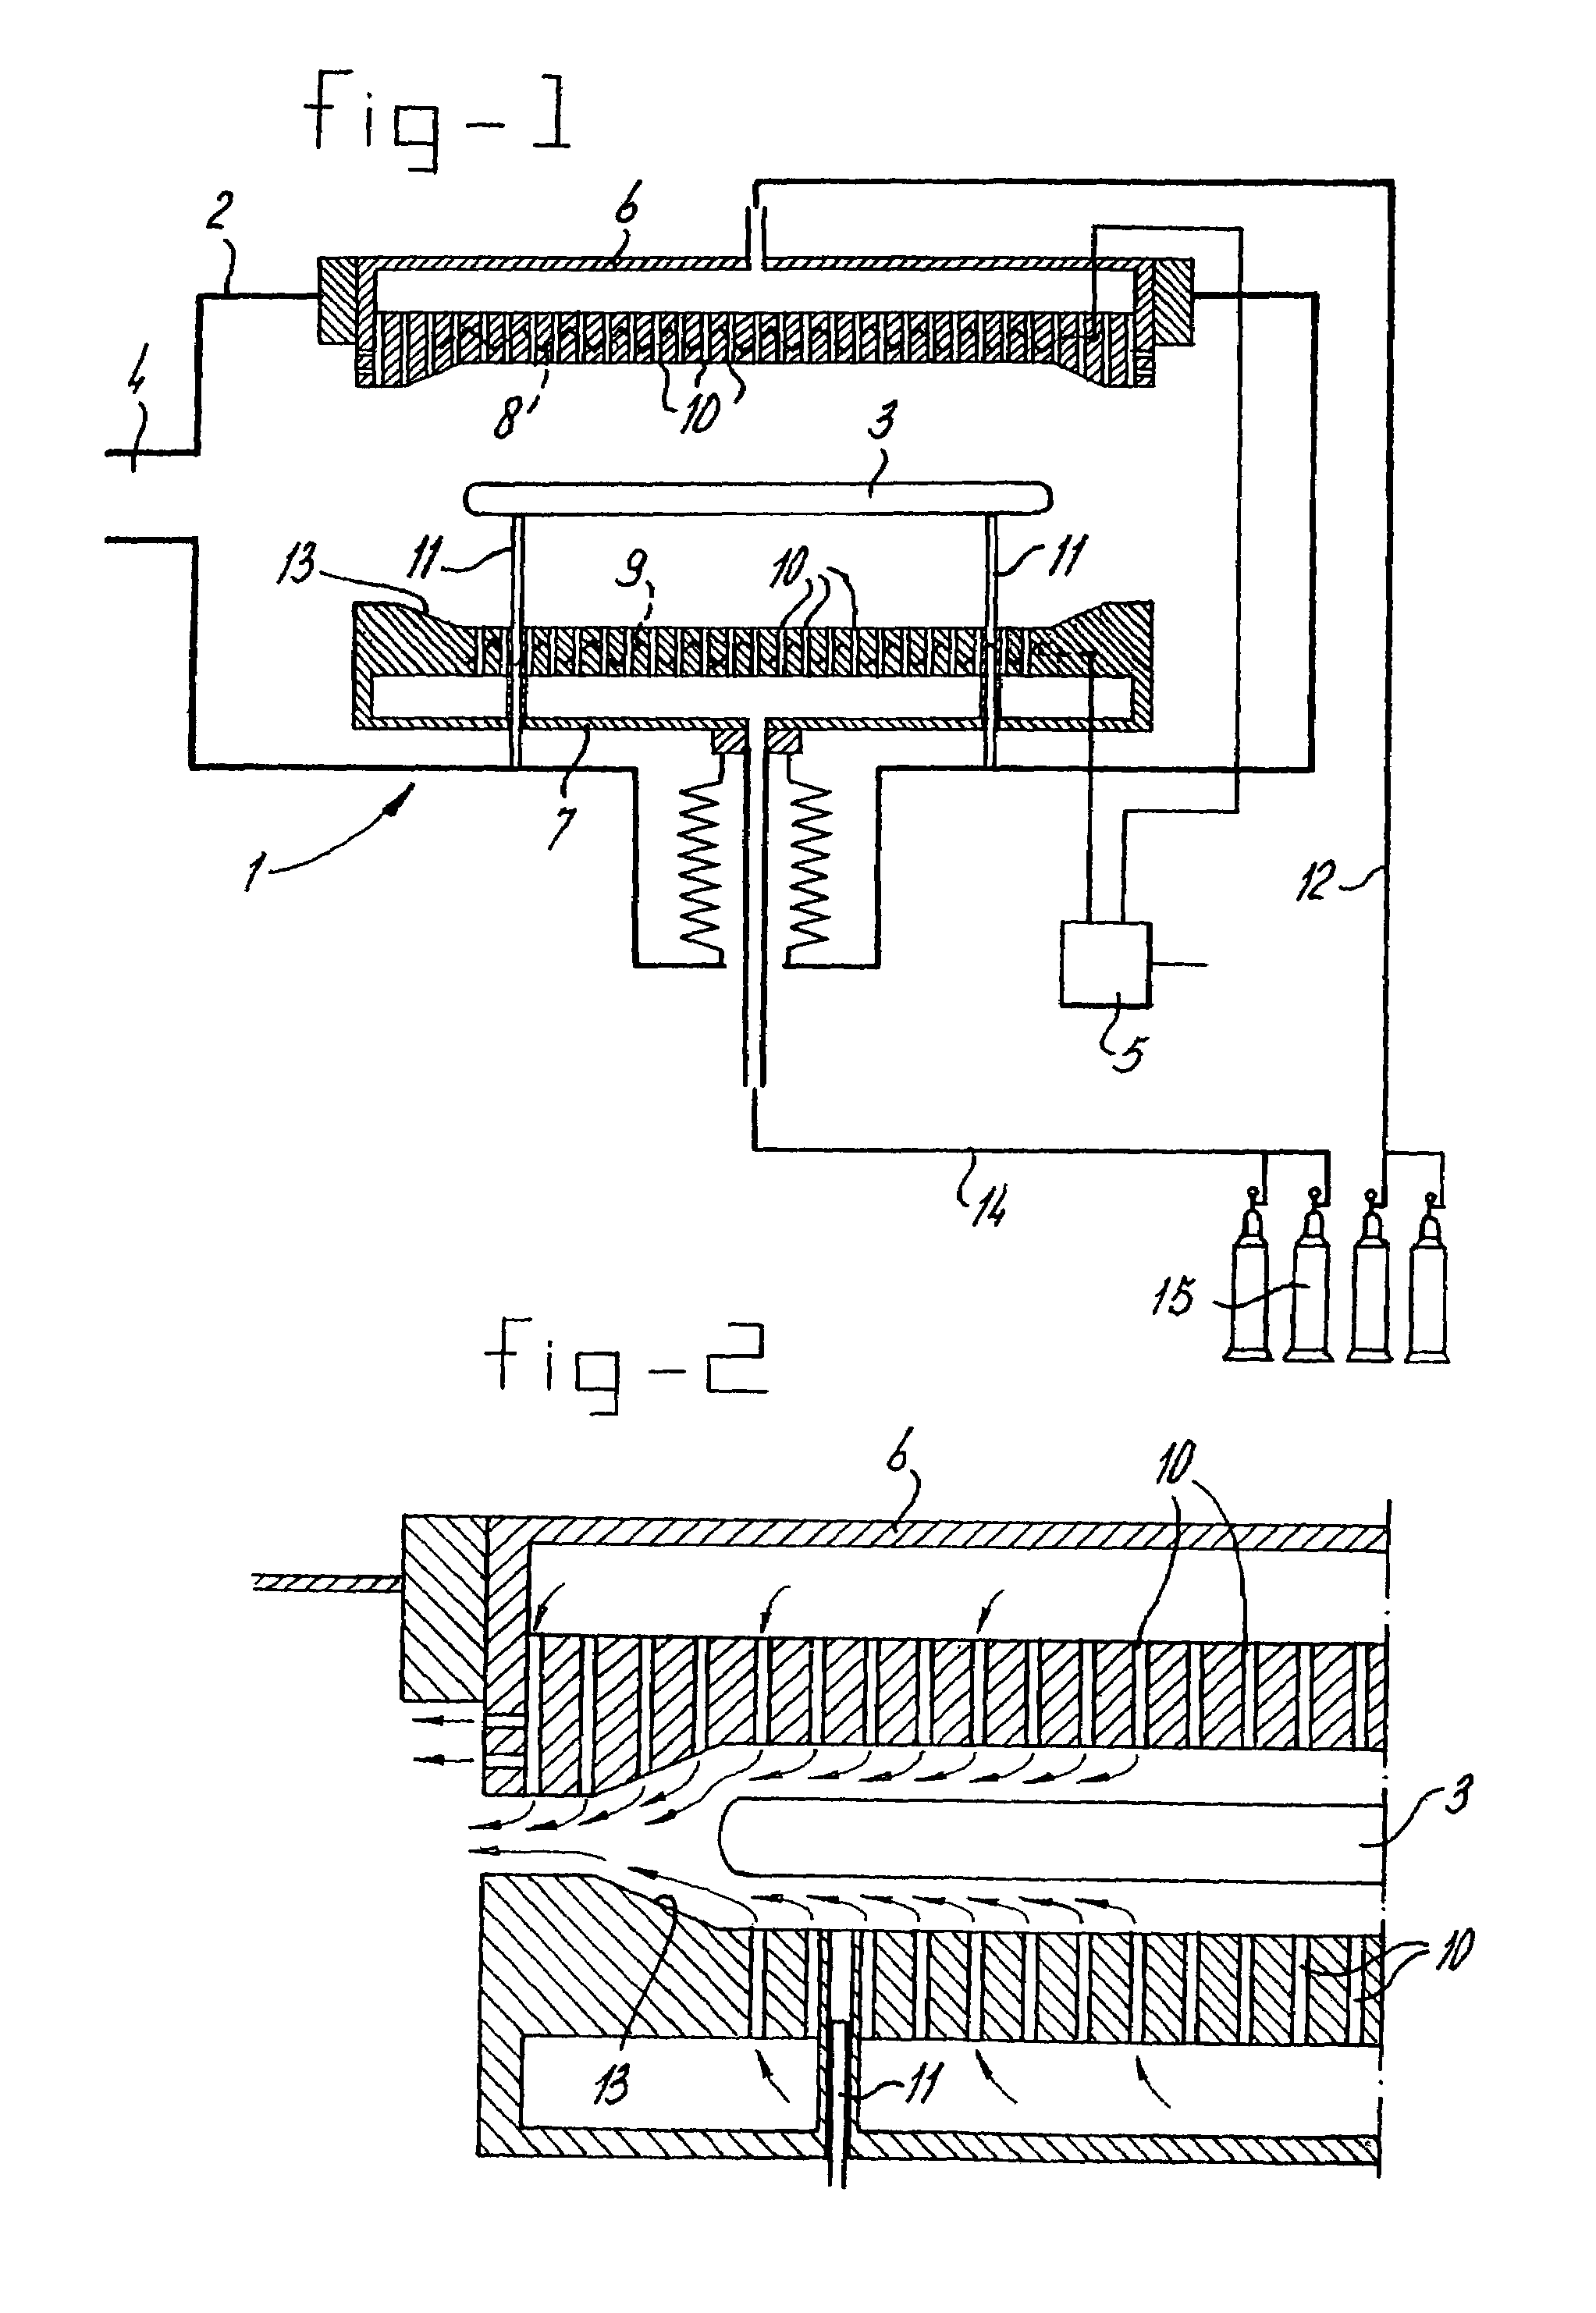 Method and apparatus for supporting a semiconductor wafer during processing